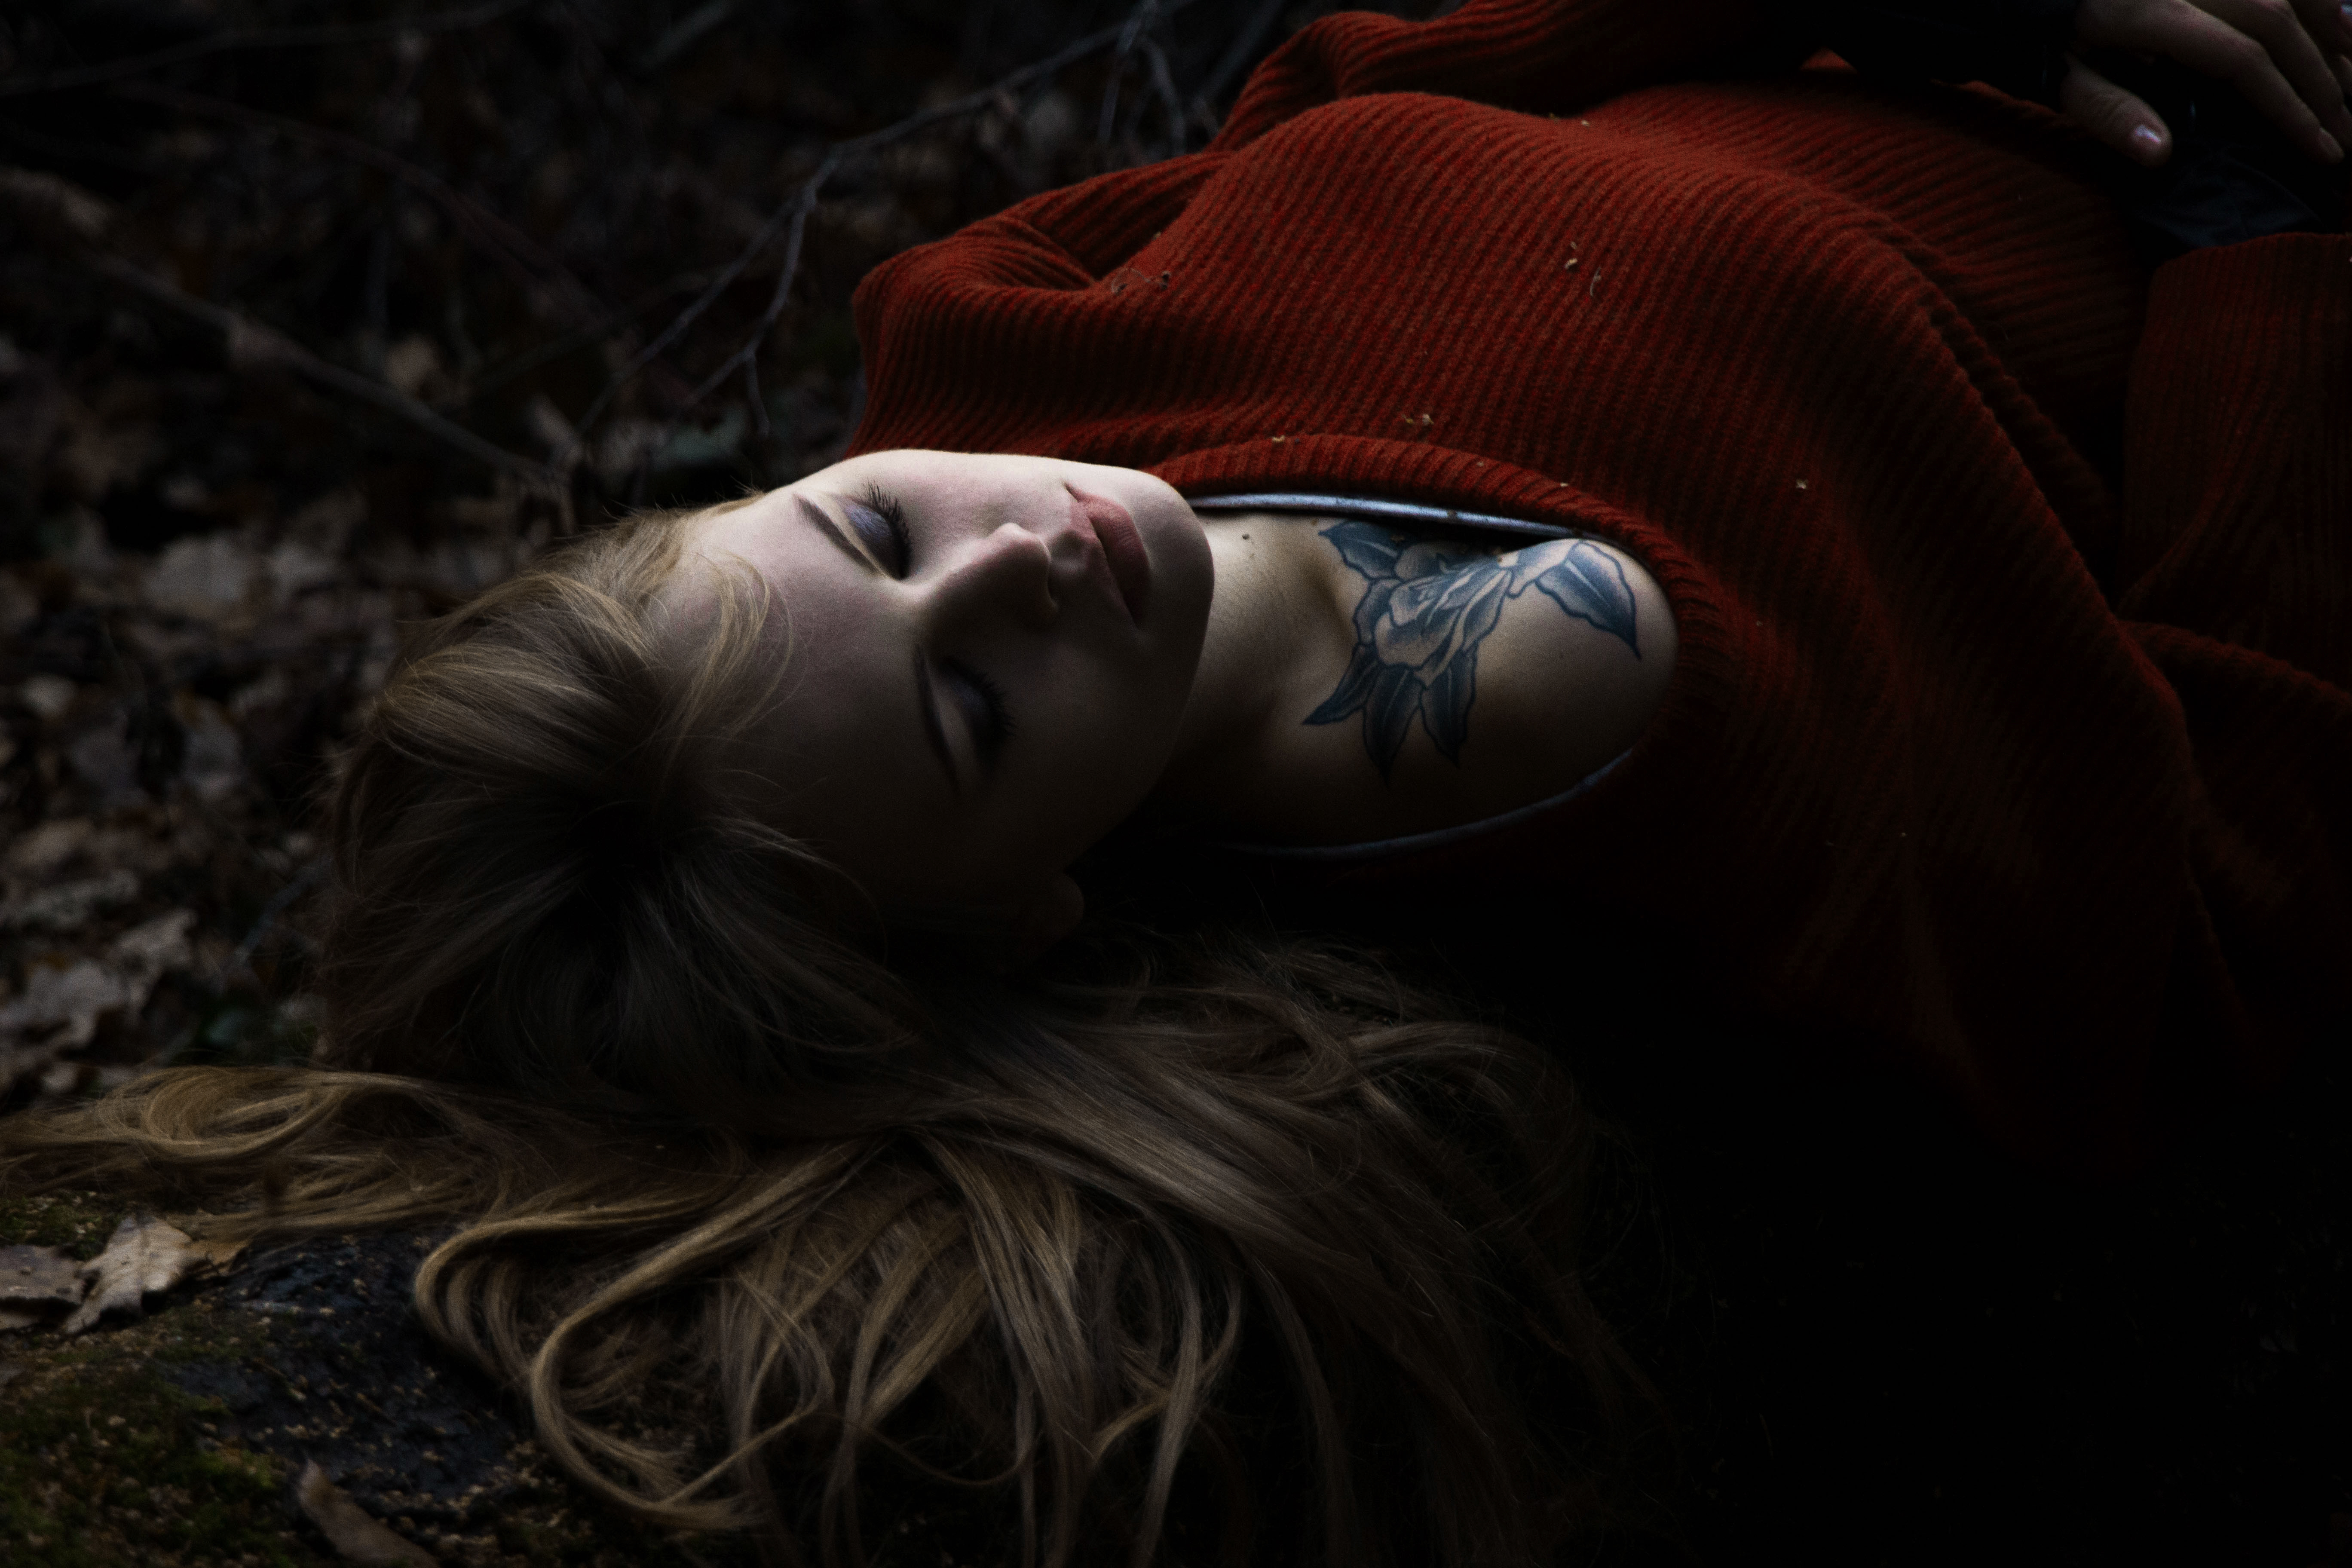 Model Women Red Sweater Sweater Russian Hair Spread Out Makeup Make Up Closed Eyes 5472x3648